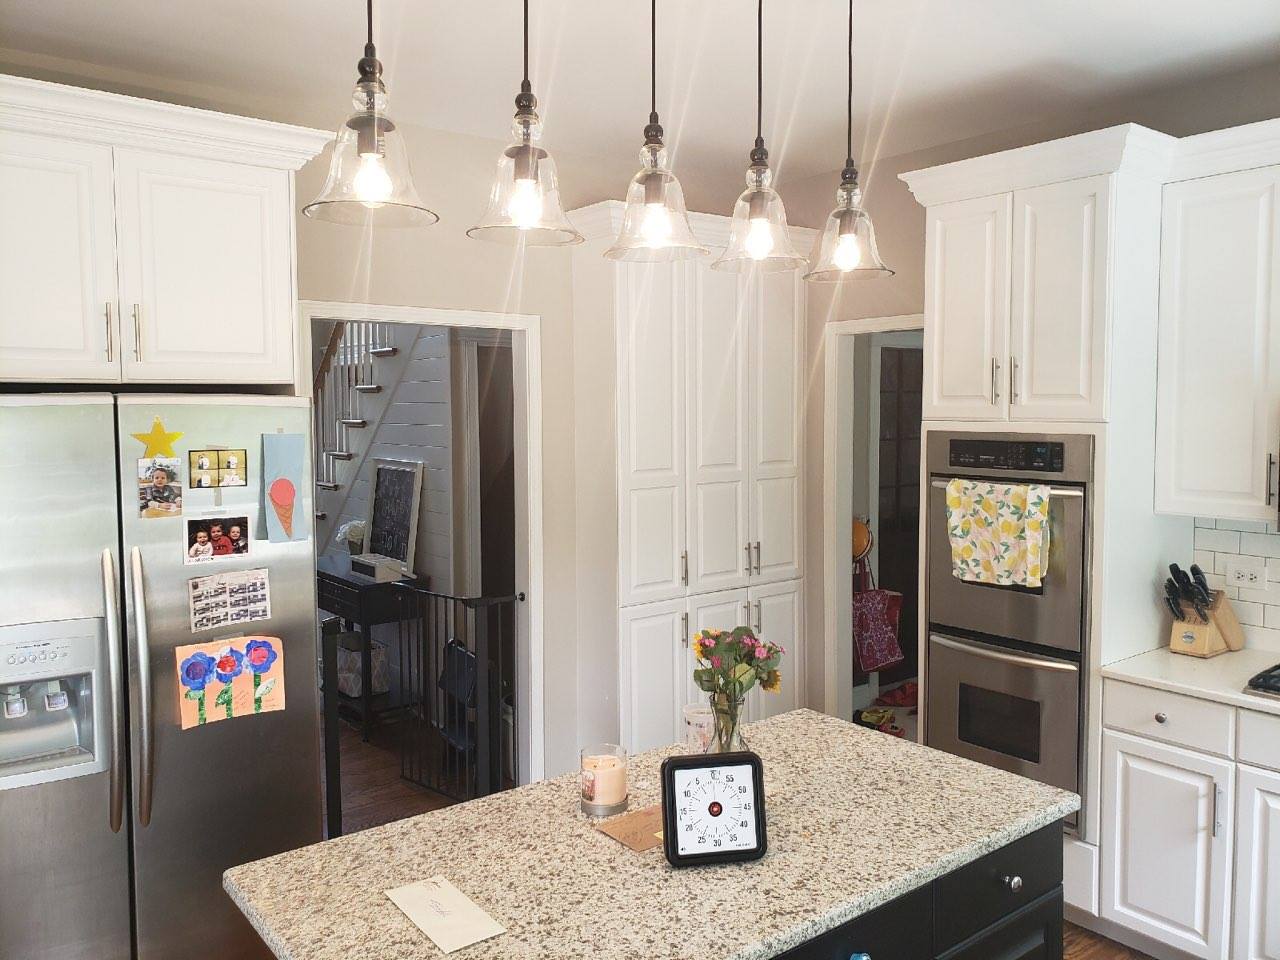 a kitchen with white cabinets , granite counter tops , stainless steel appliances and a clock on the island .